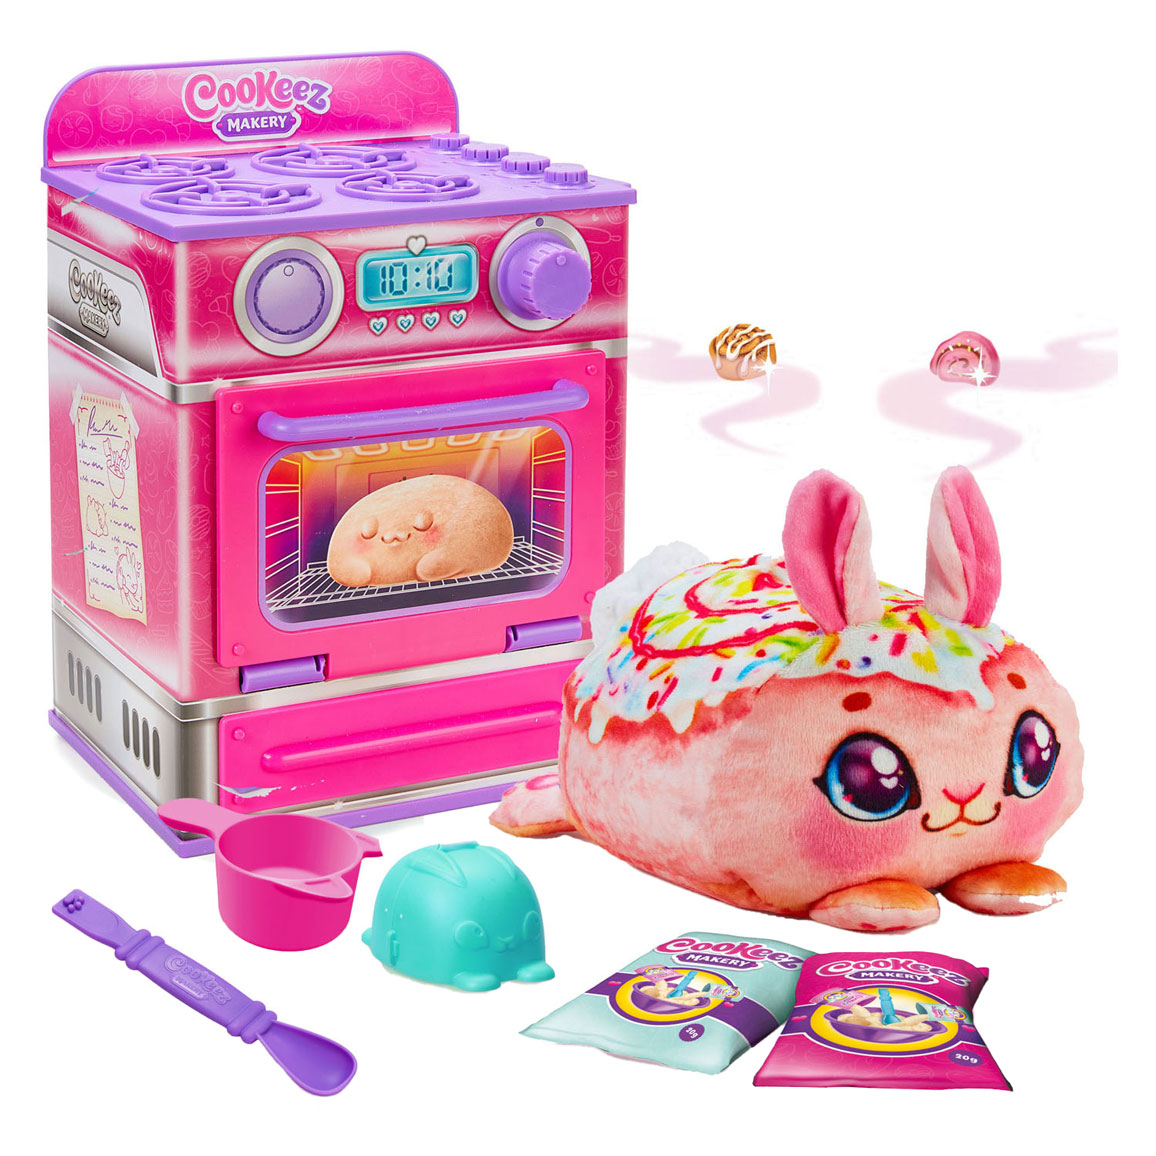 Cookeez Makery Oven Mix and Make Plush, Bread